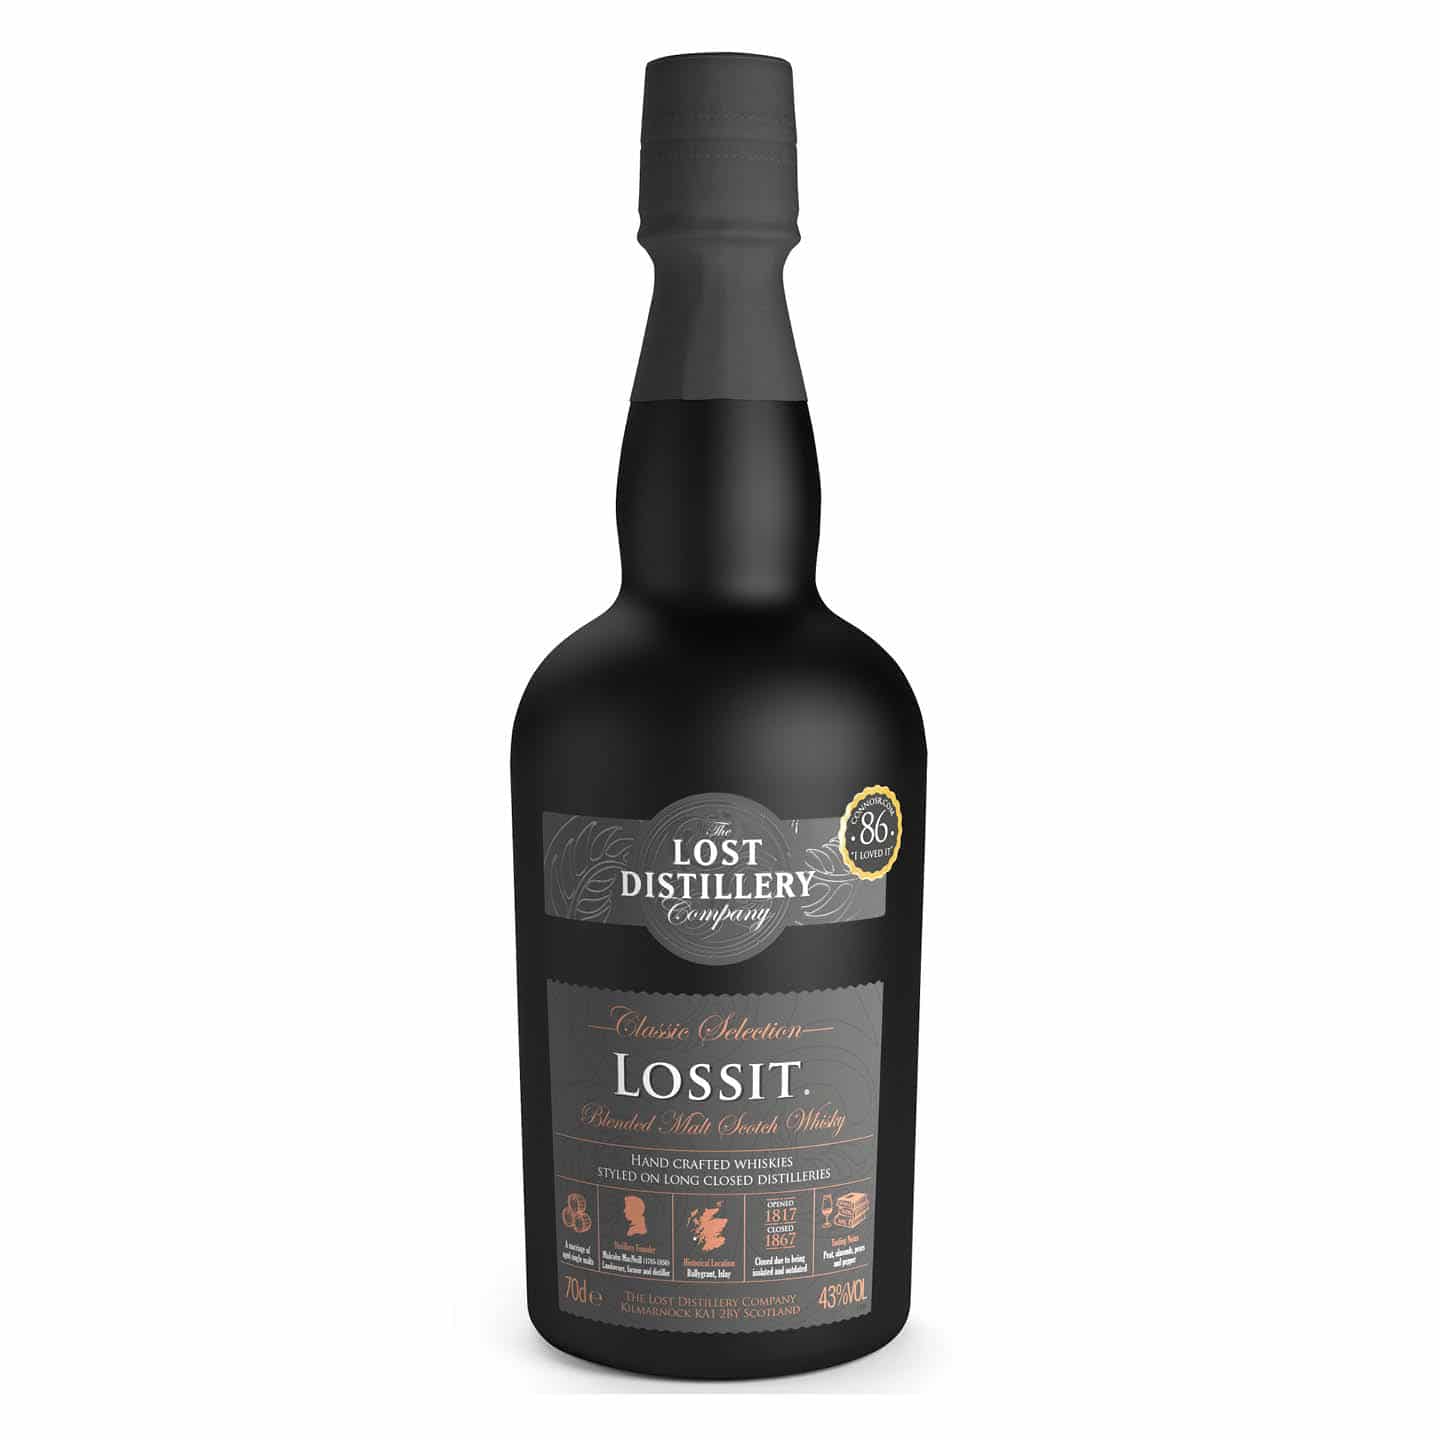 lost distillery whisky écossais lossit